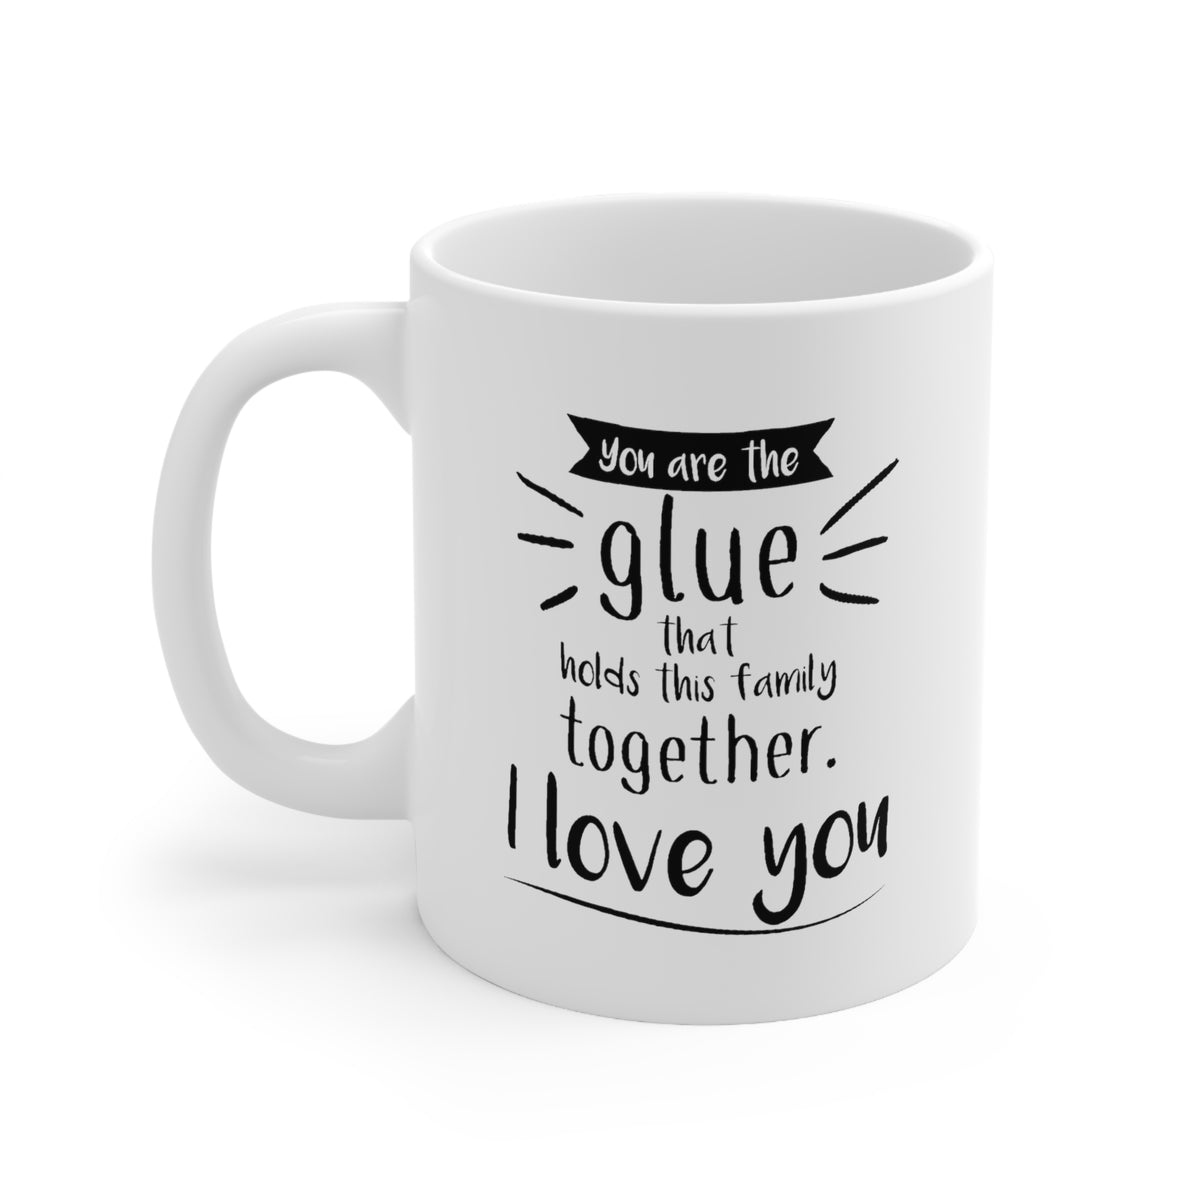 You Are The Glue That Holds This Family Together. I Love You - Father’s Day Ceramic Coffee Cup